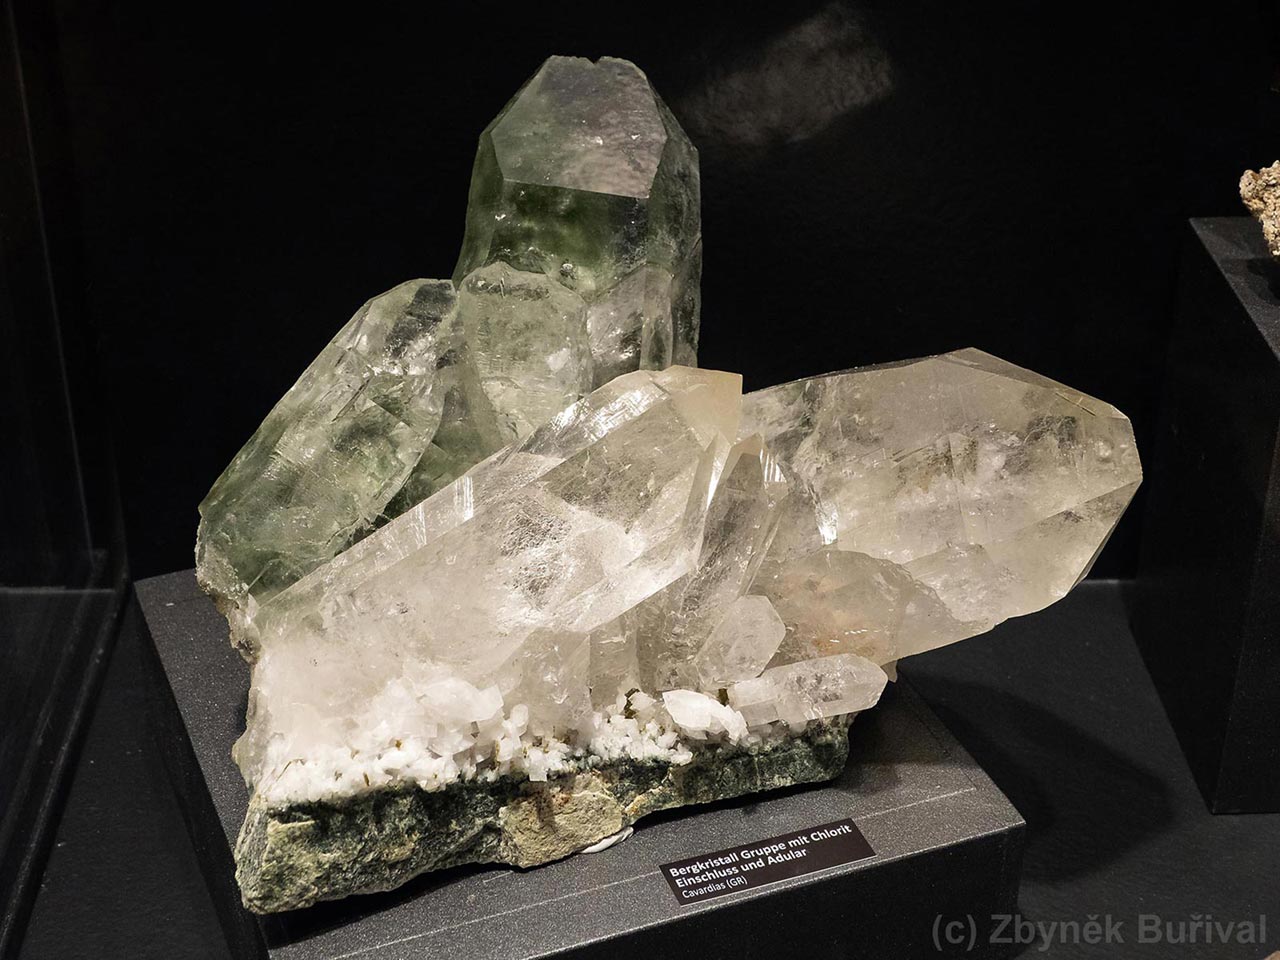 clear quartz crystals with minor chlorite and adularia from Cavardias, Switzerland